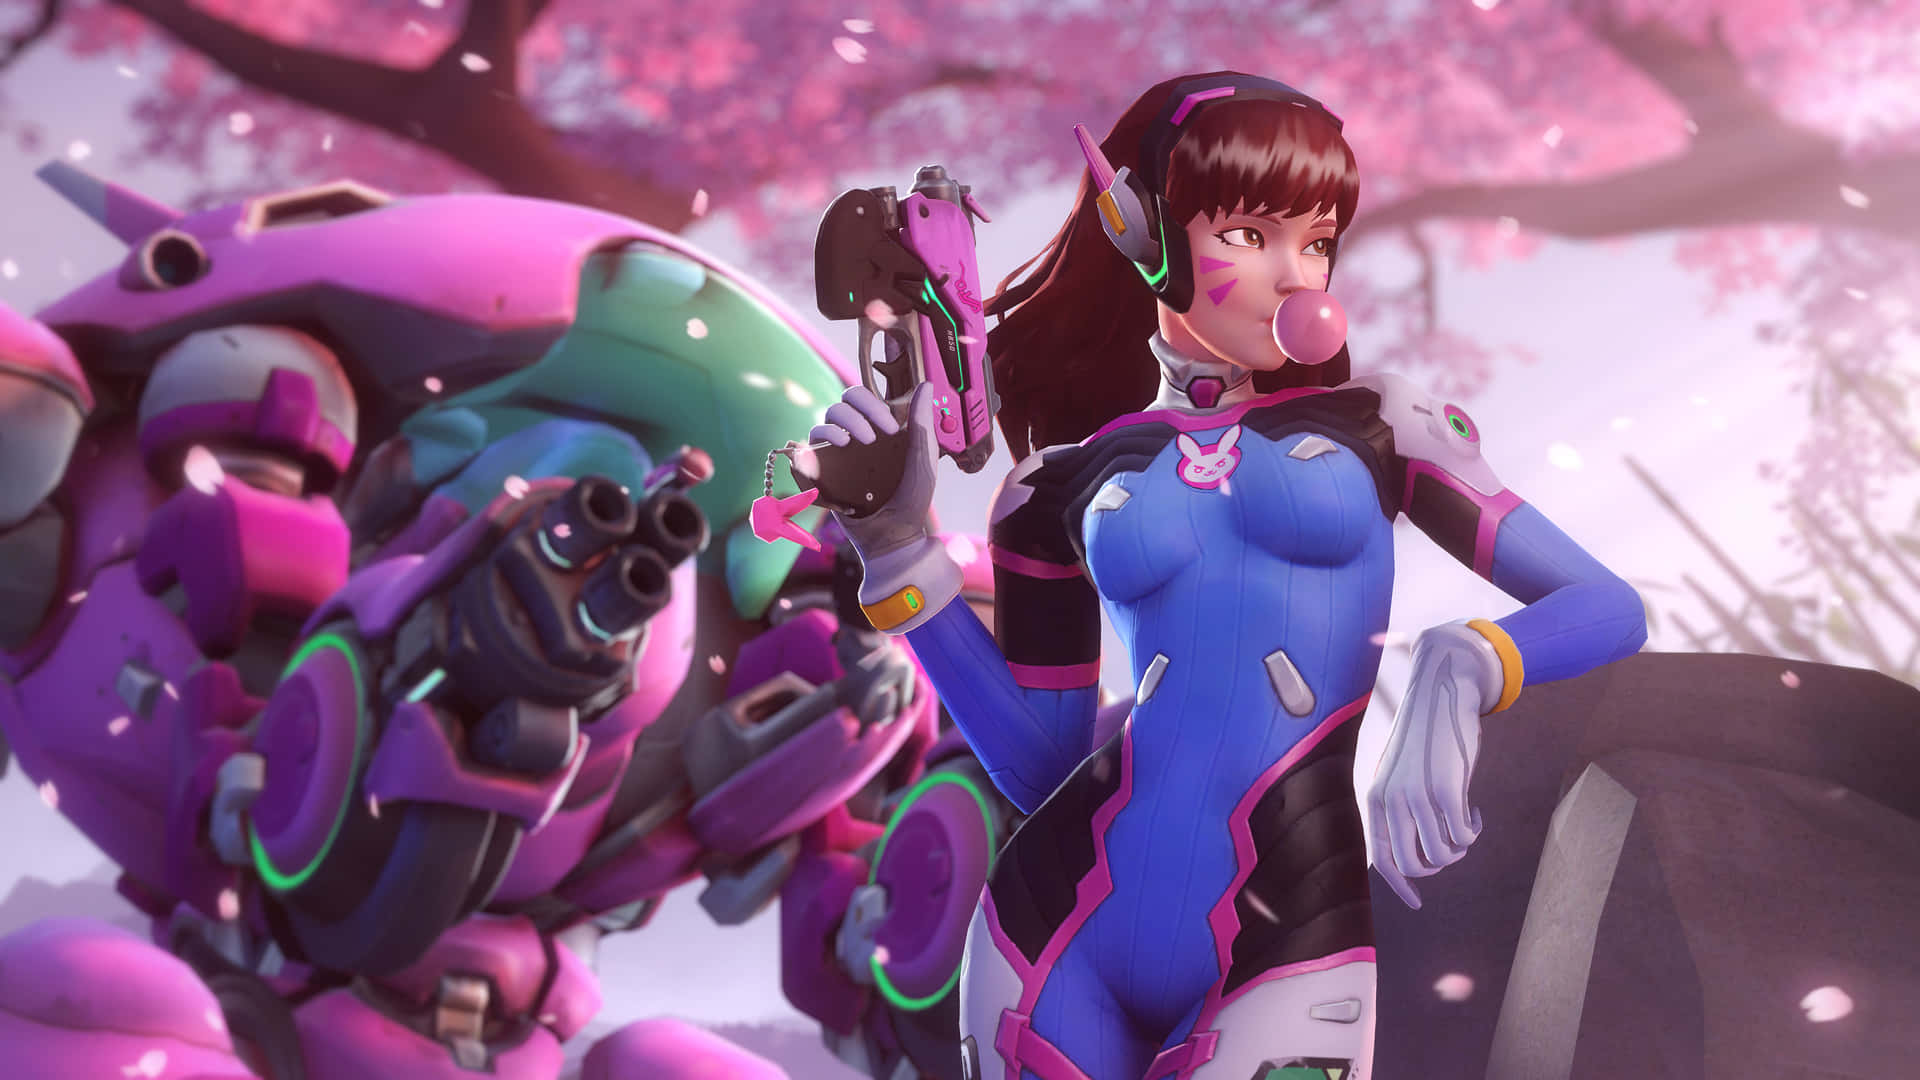 Aesthetic Overwatch - Embrace the vibrant world of heroes Wallpaper